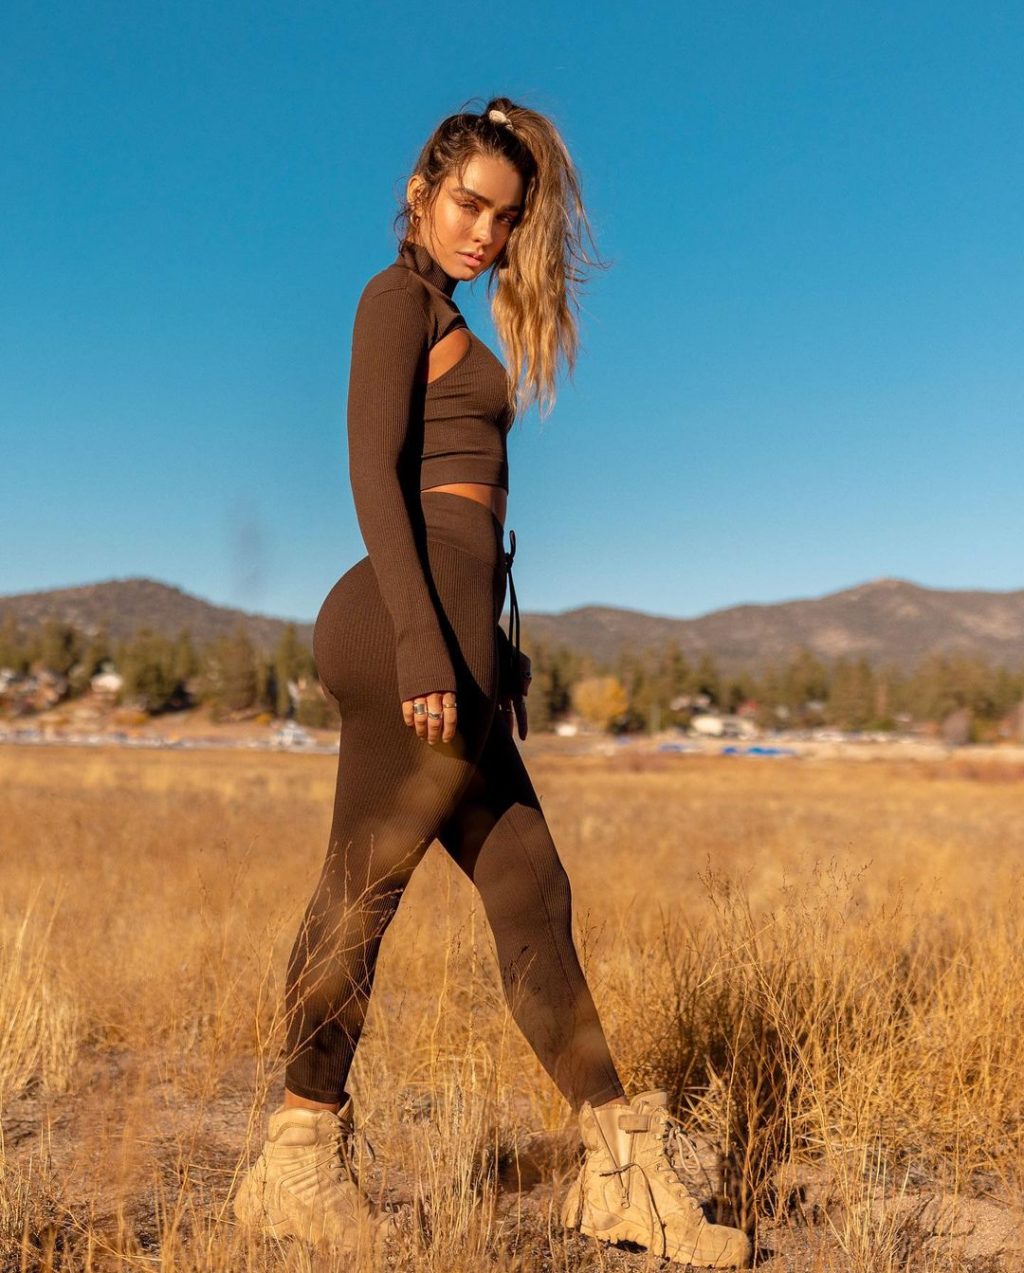 Sommer Ray Sexy (21 Photos)